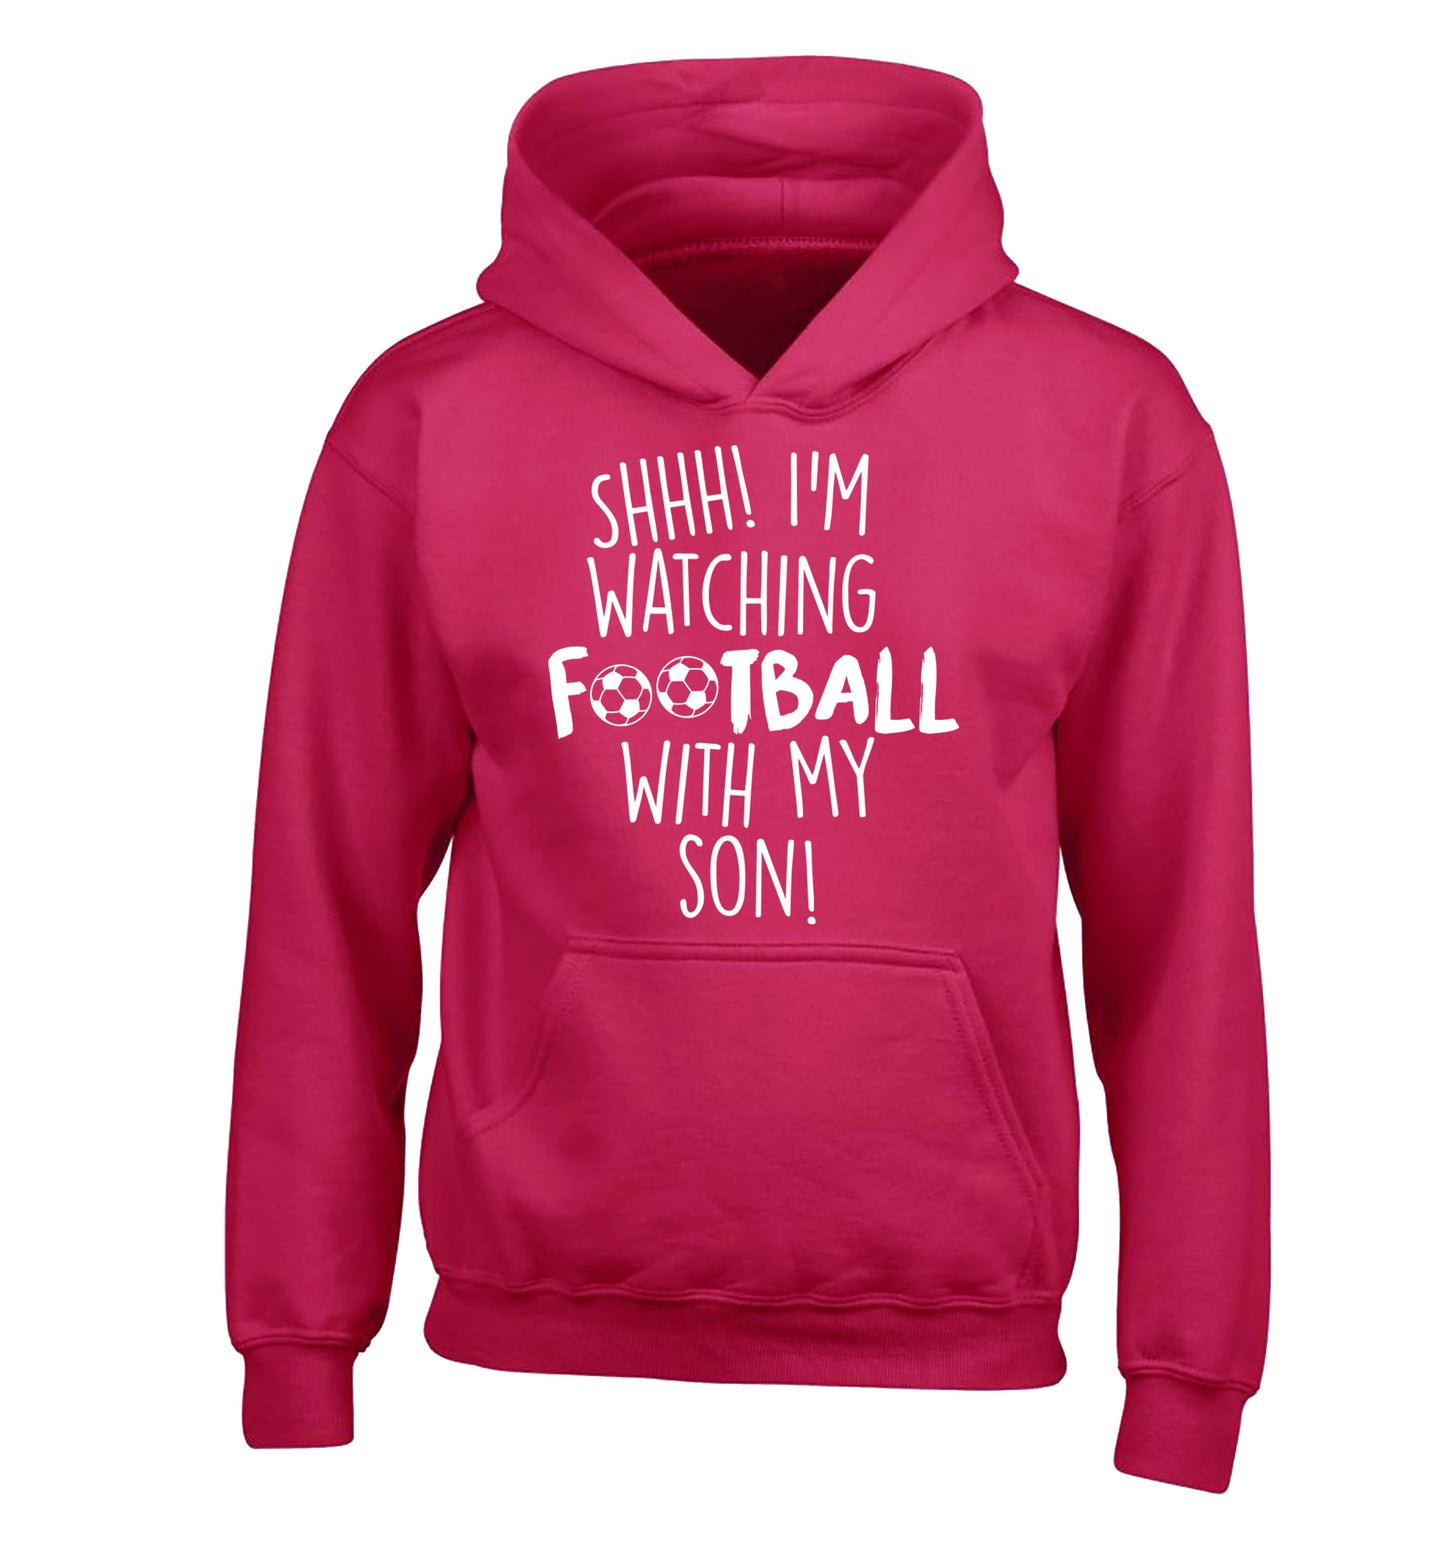 Shhh I'm watching football with my son children's pink hoodie 12-14 Years